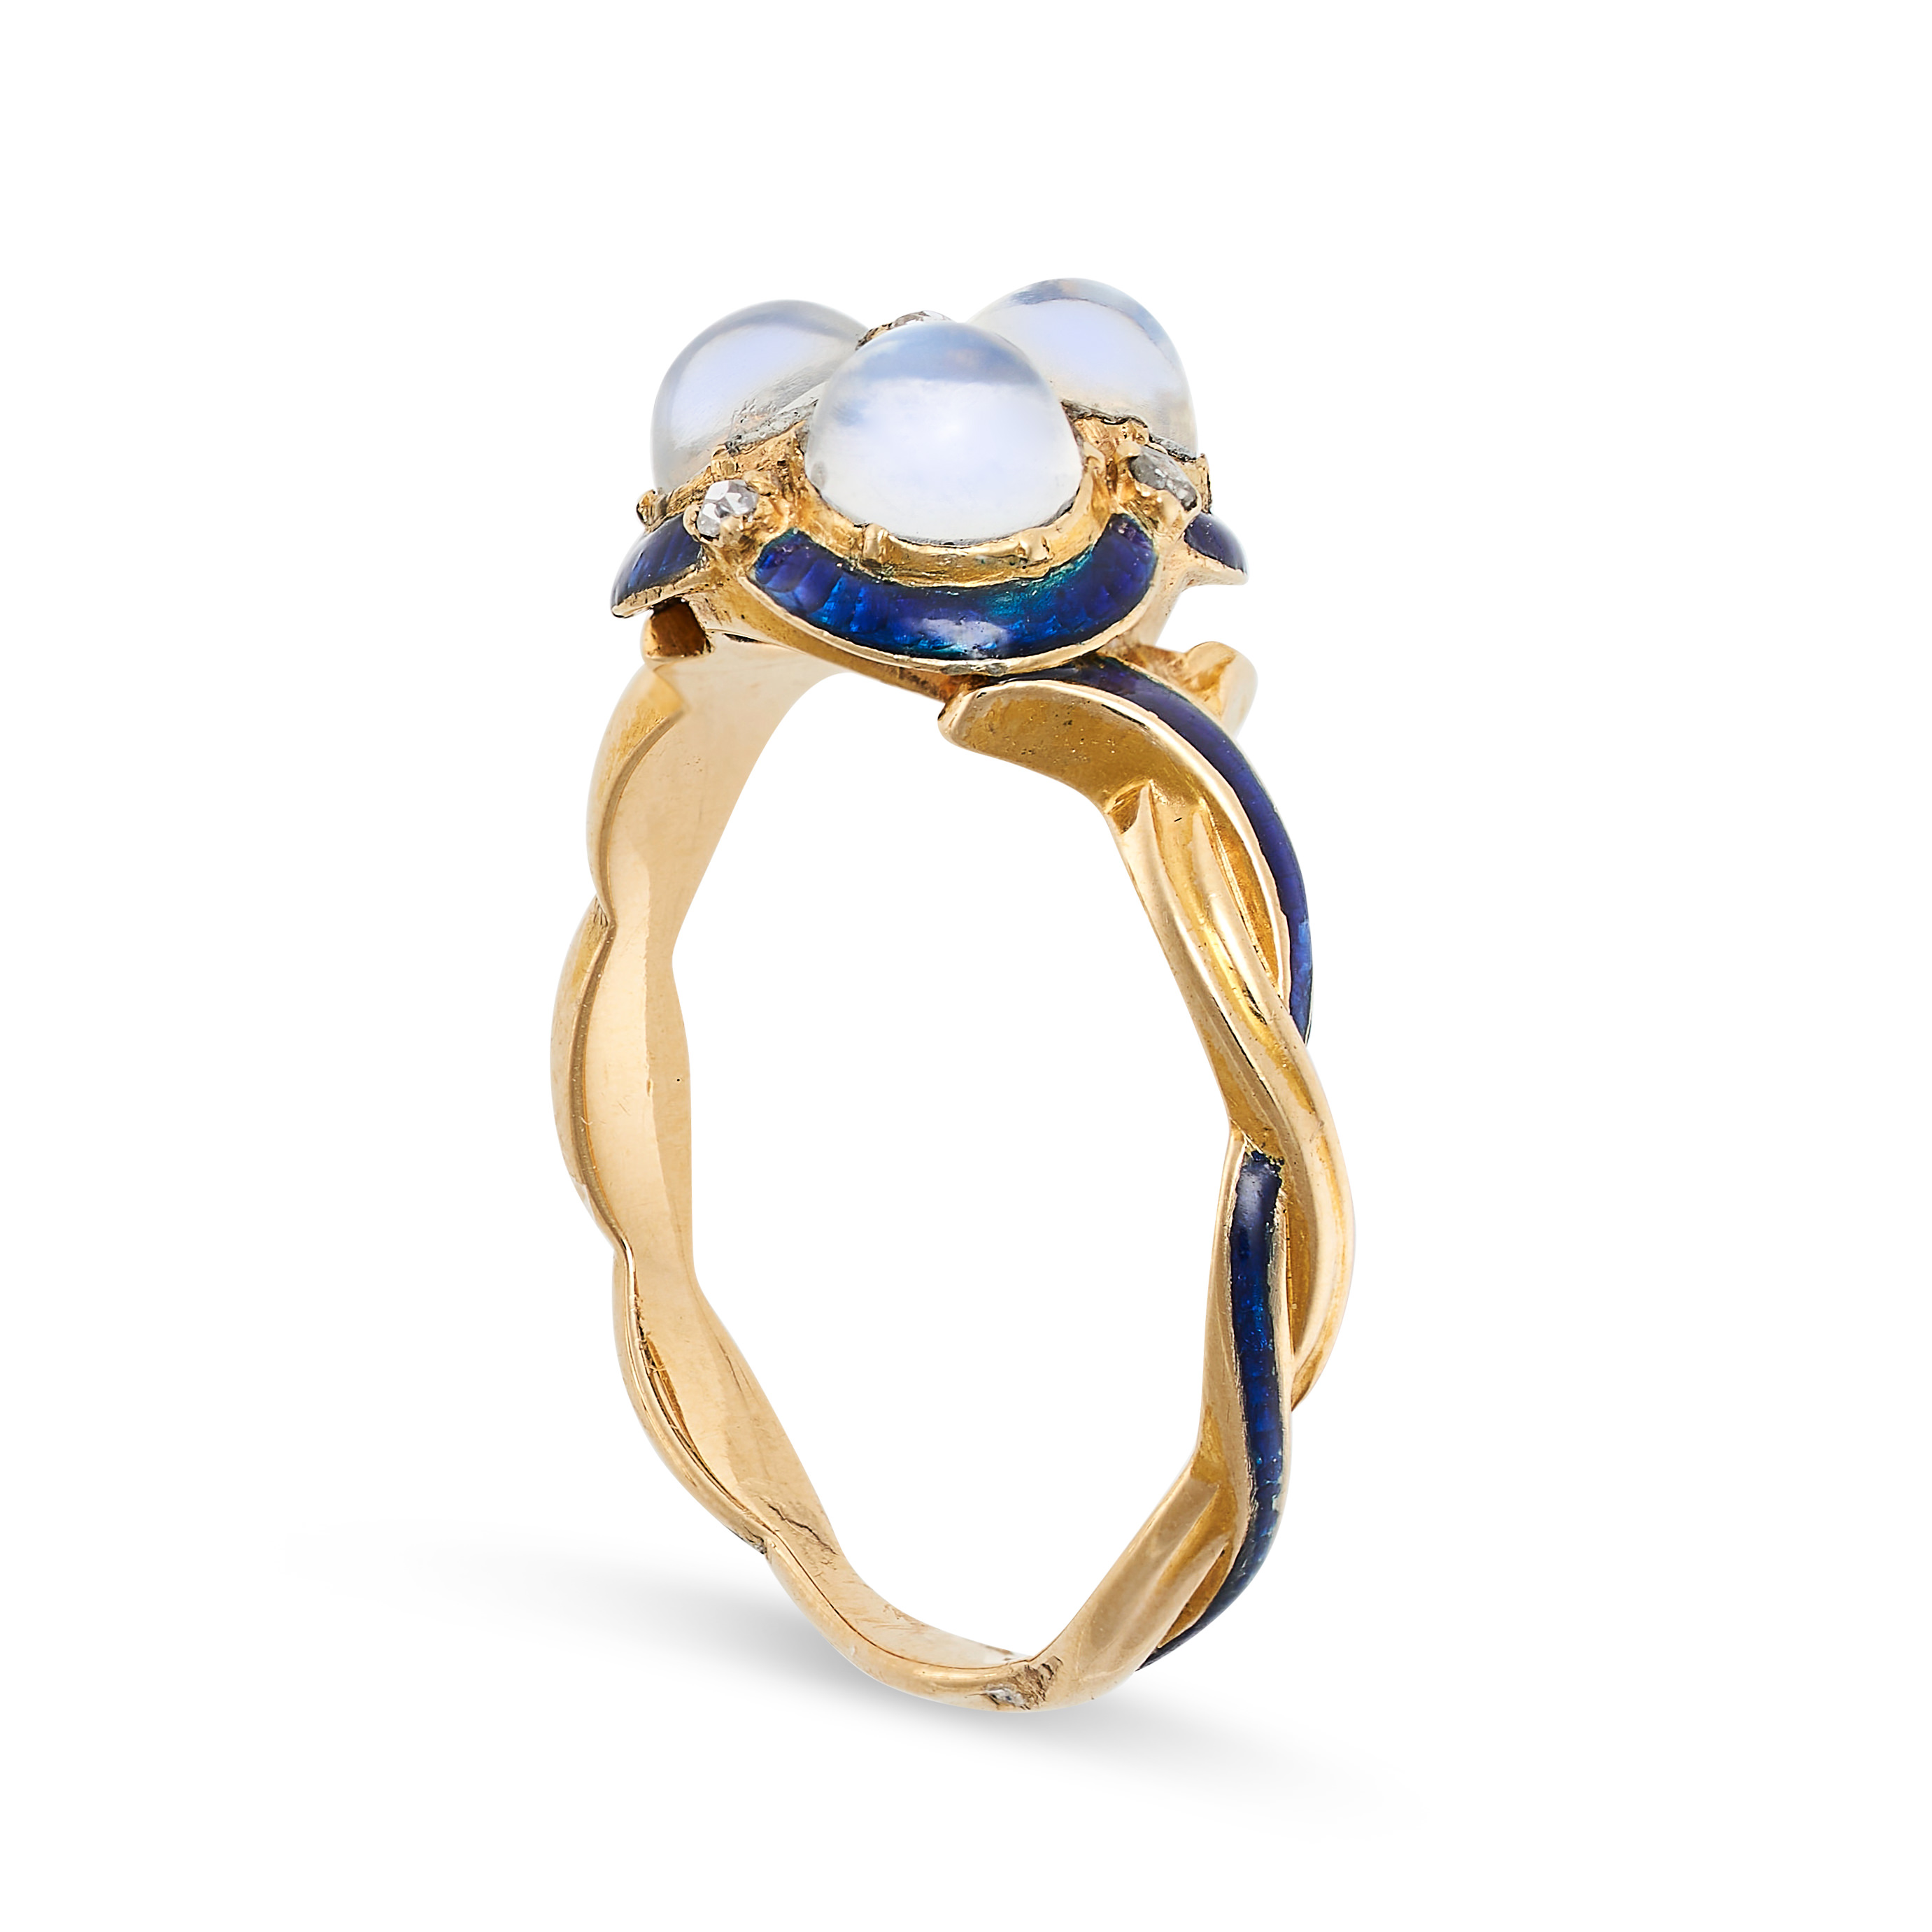 AN ANTIQUE MOONSTONE, ENAMEL AND DIAMOND RING in yellow gold, set with three cabochon moonstones - Image 2 of 2